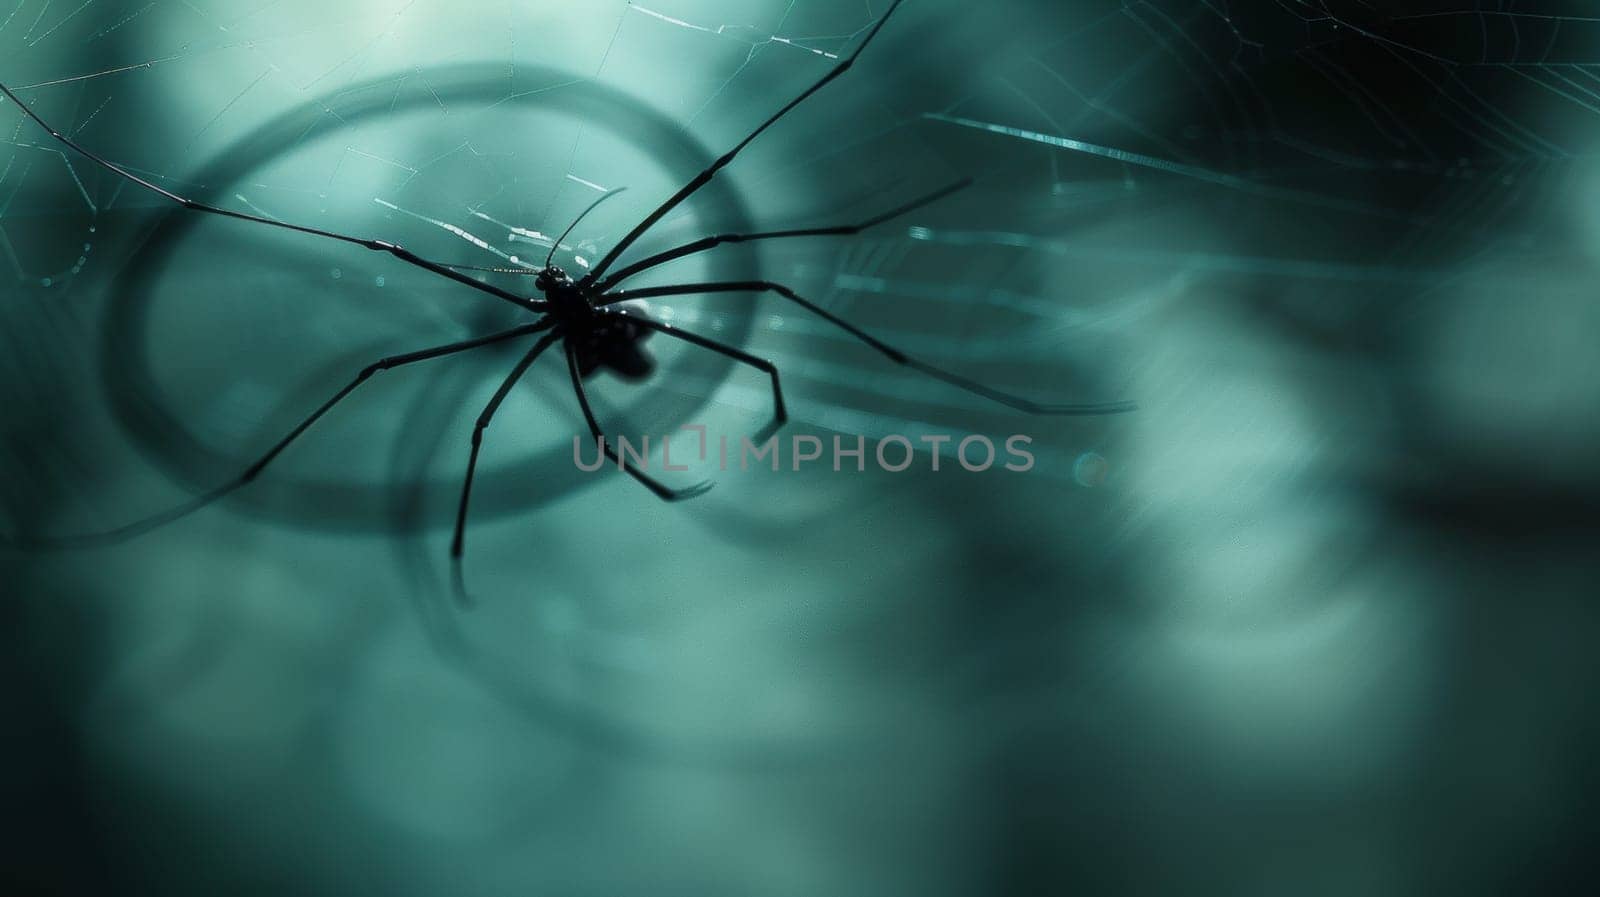 A spider is sitting in a web with its legs crossed